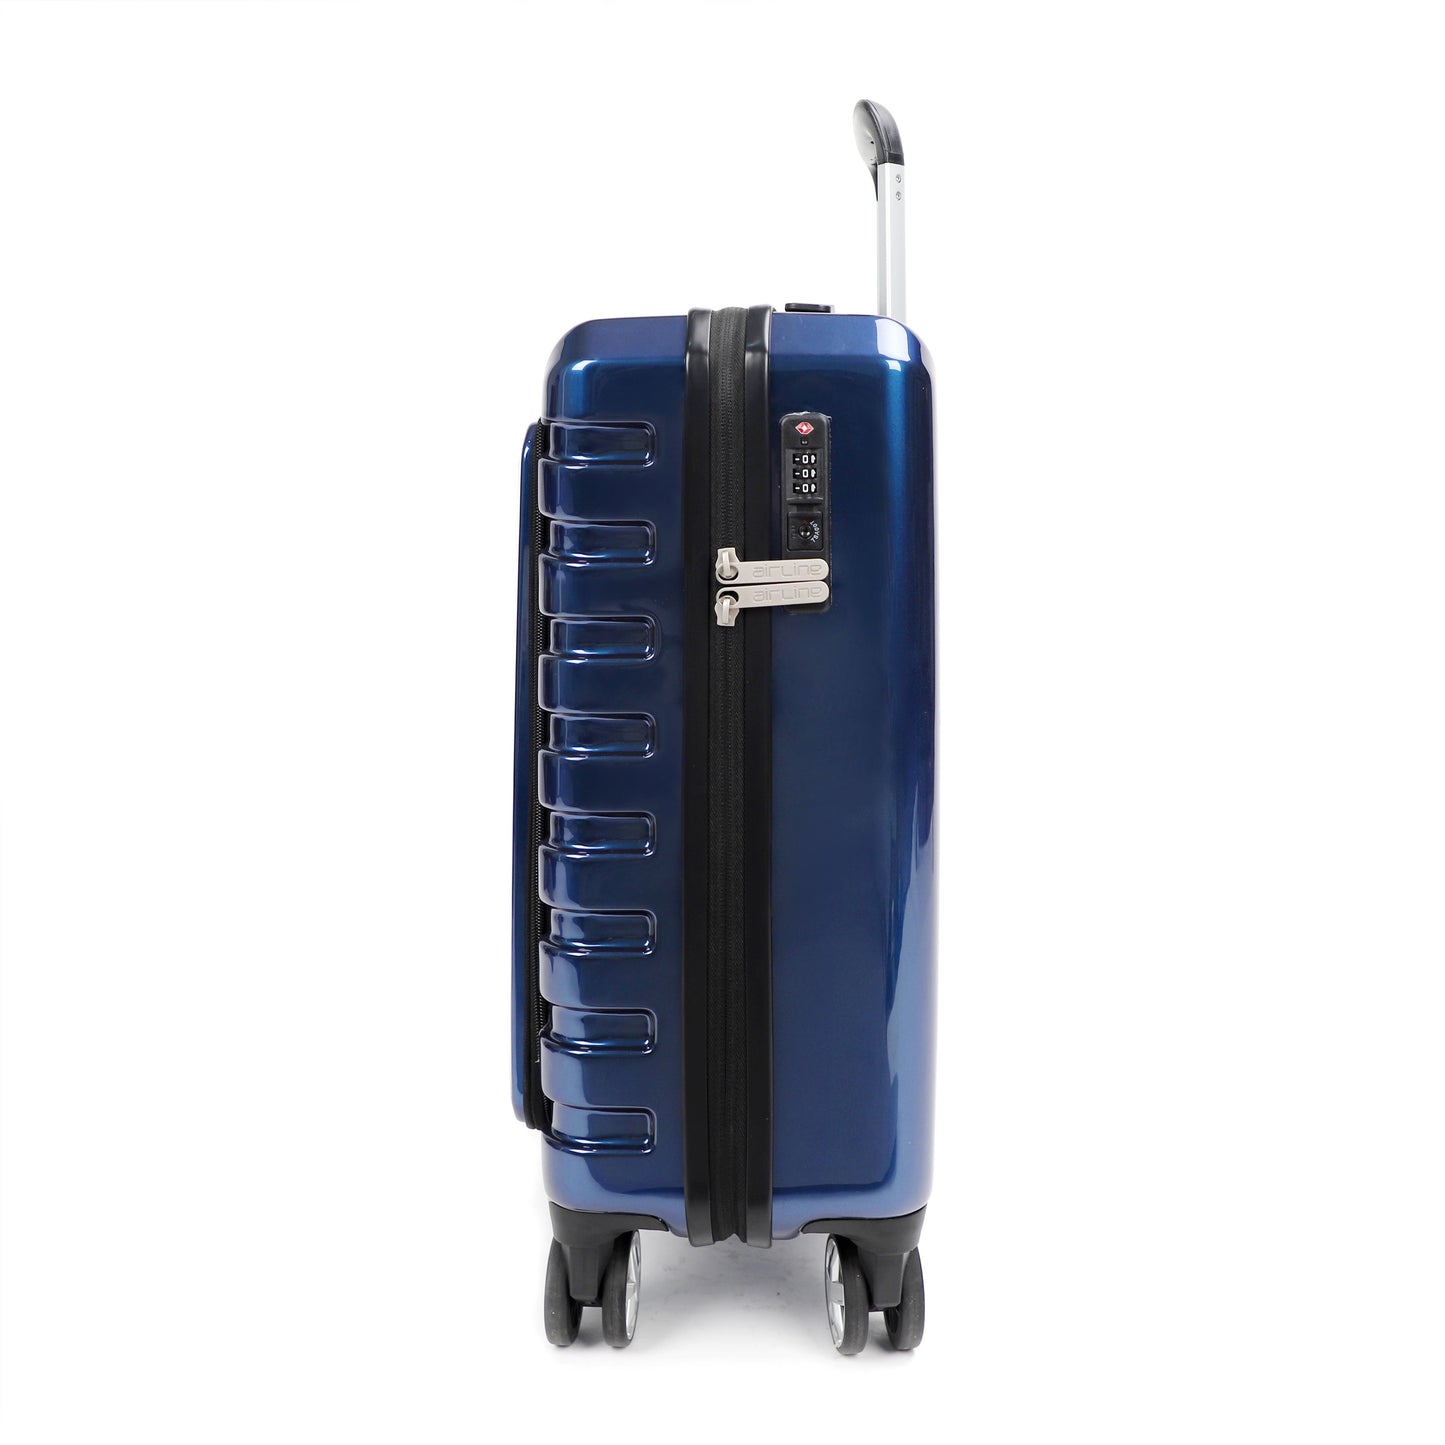 Airline_Carry_On_Luggage_Blue_right_view_T1978155005